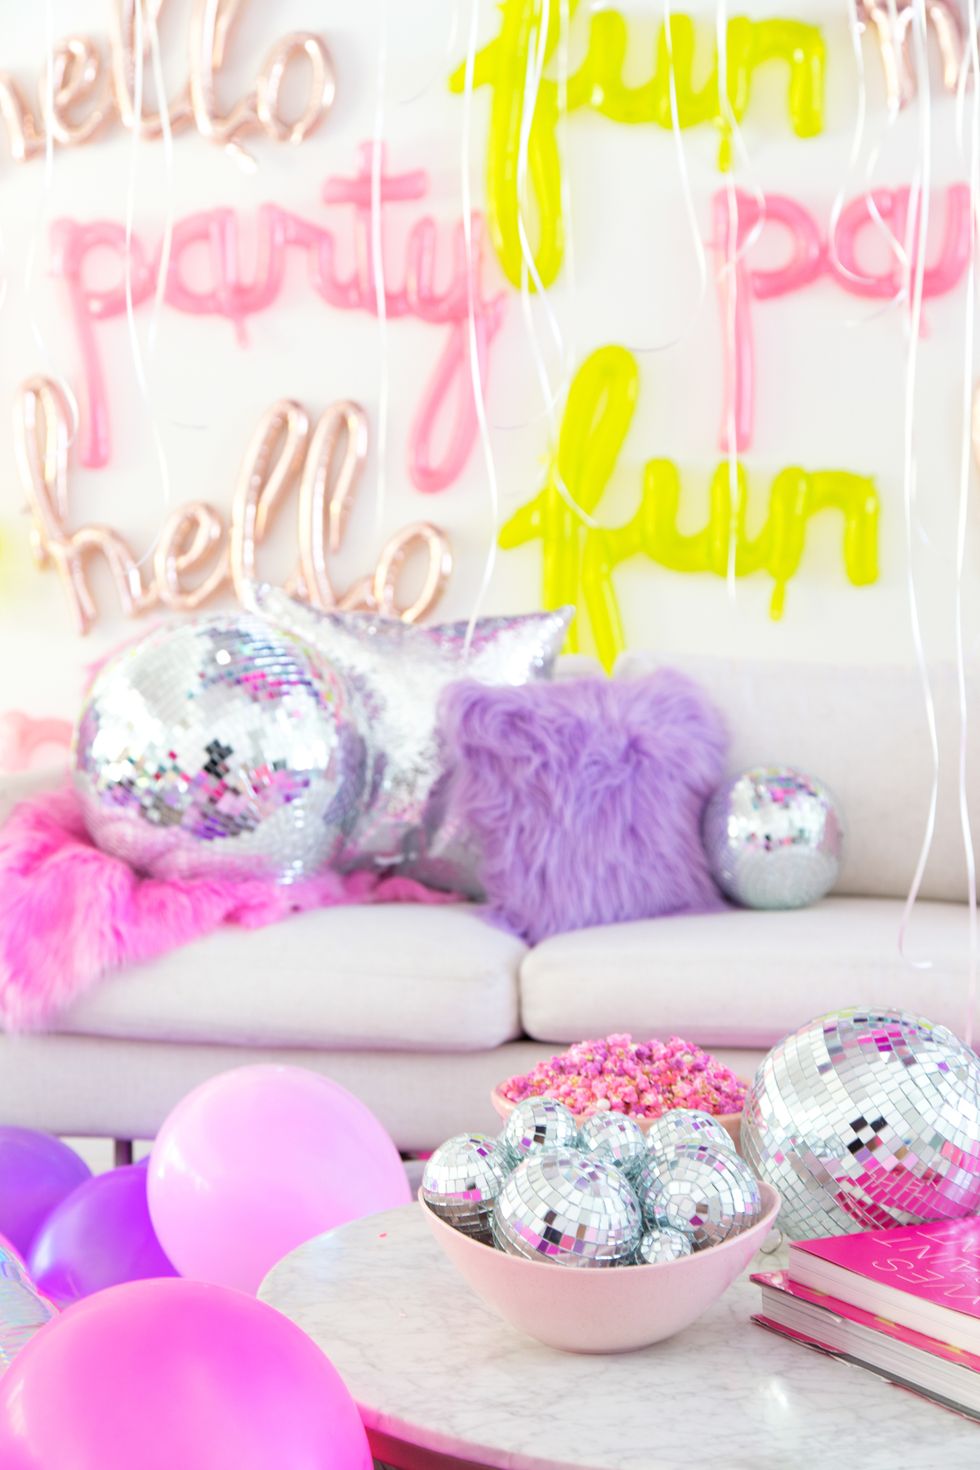 6 Spring Birthday Party Ideas for Kids